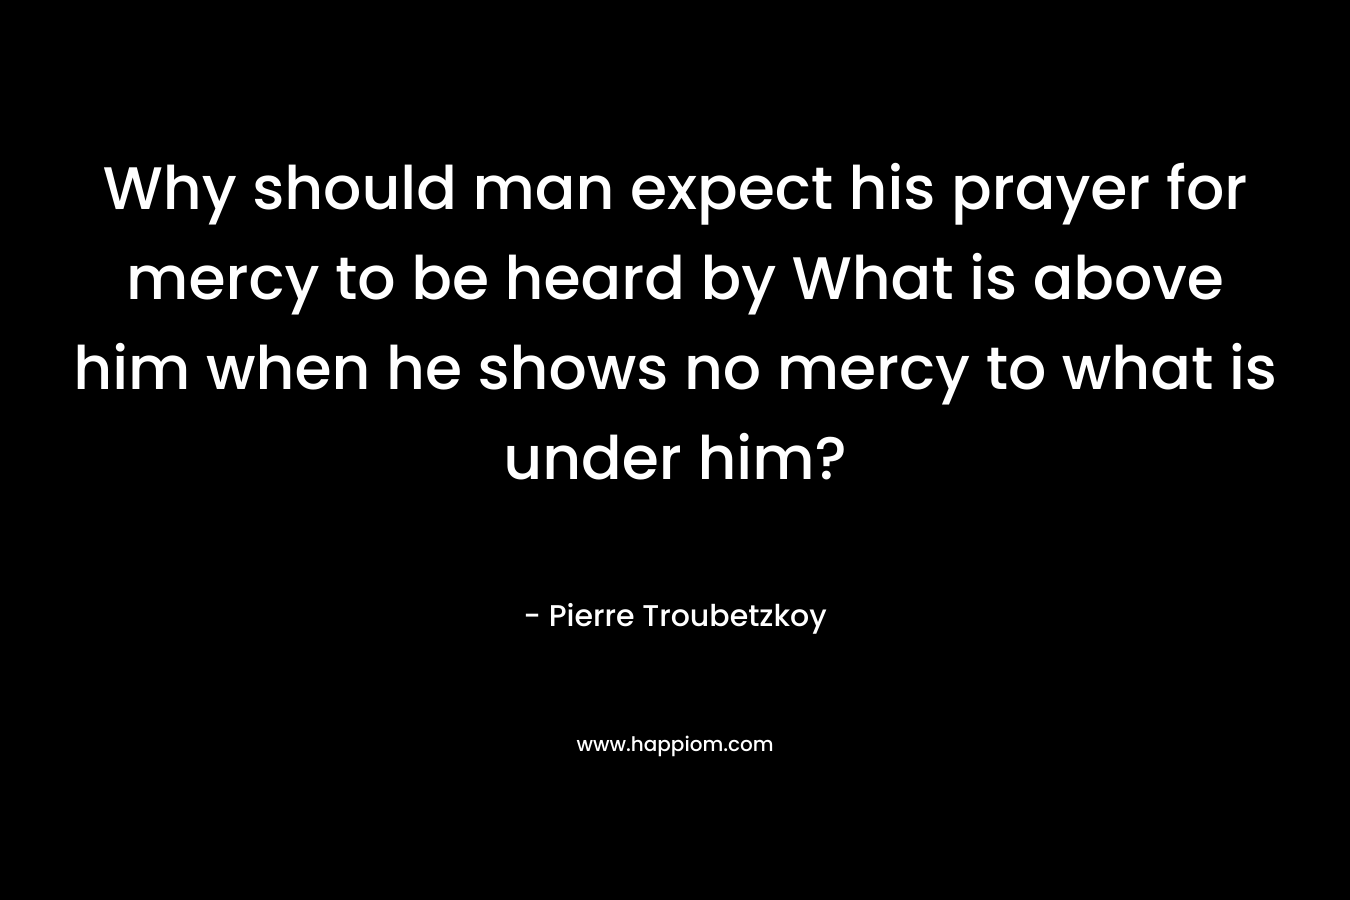 Why should man expect his prayer for mercy to be heard by What is above him when he shows no mercy to what is under him? – Pierre Troubetzkoy